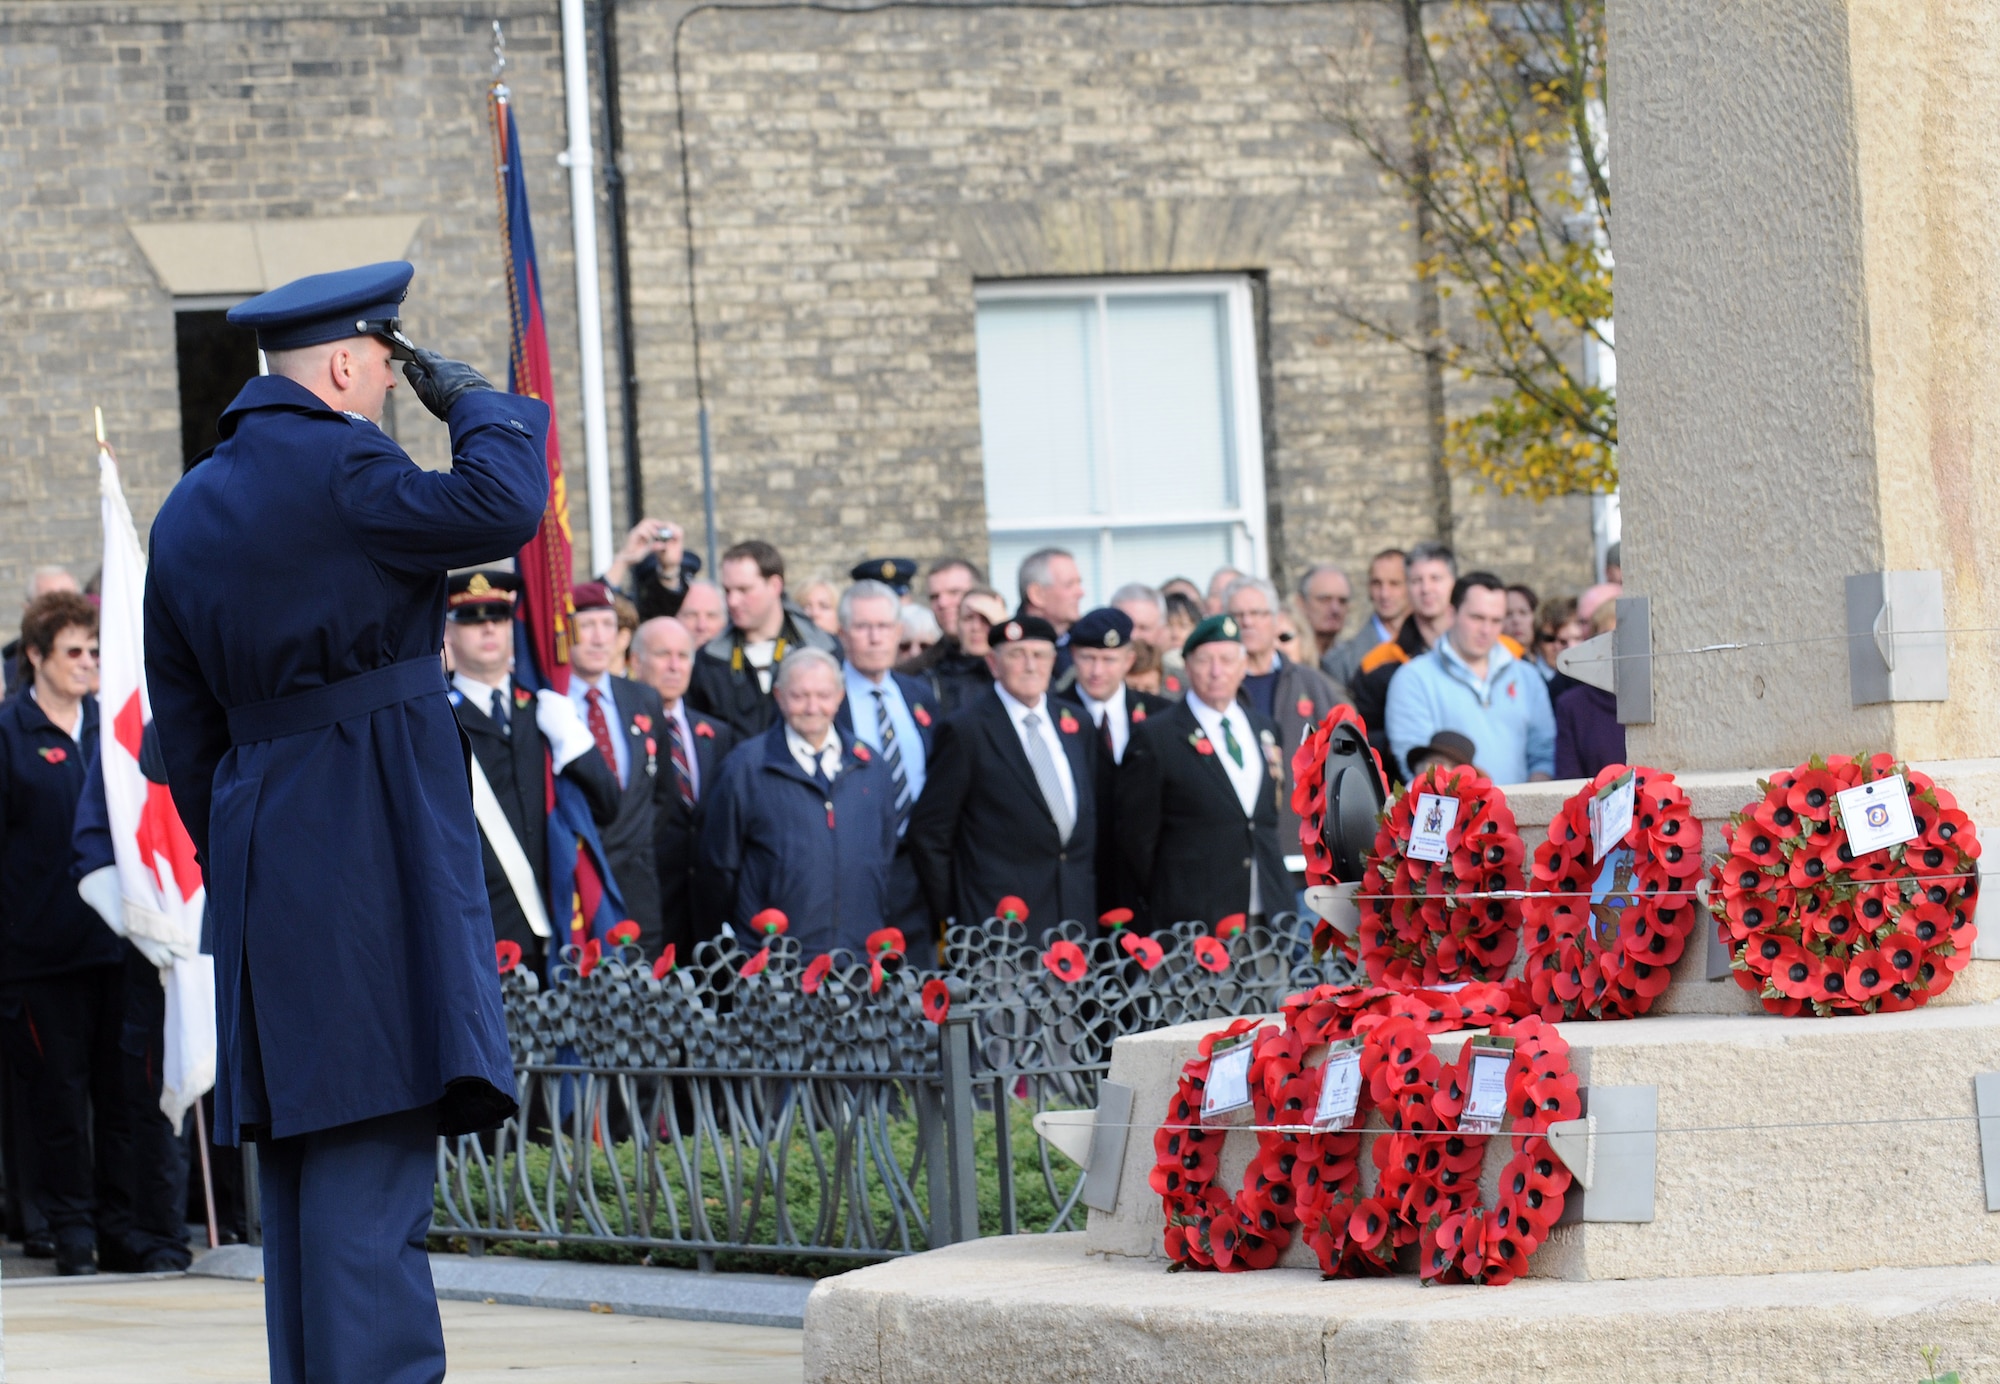 RAF MILDENHALL, England -- Col. Chad Manske, 100th Air Refueling Wing commander, salutes a poppy wreath at a Remembrance Day ceremony at Angel Hill, Bury St. Edmunds Nov. 9. Servicemembers from RAFs Mildenhall and Lakenheath participated in a military procession with British forces before the ceremony. The poppy flower is a traditional symbol of remembrance of World War I. It was at bloom across some of the worst battlefields in the war. (U.S. Air Force photo/Senior Airman Thomas Trower)